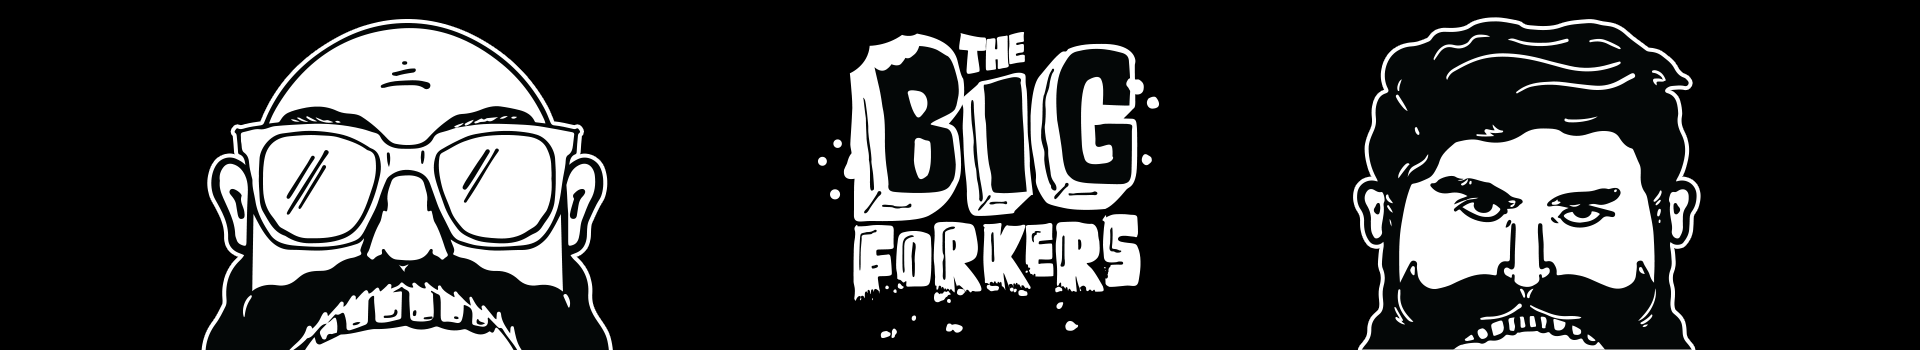 The Big Forkers - Official Merchandise